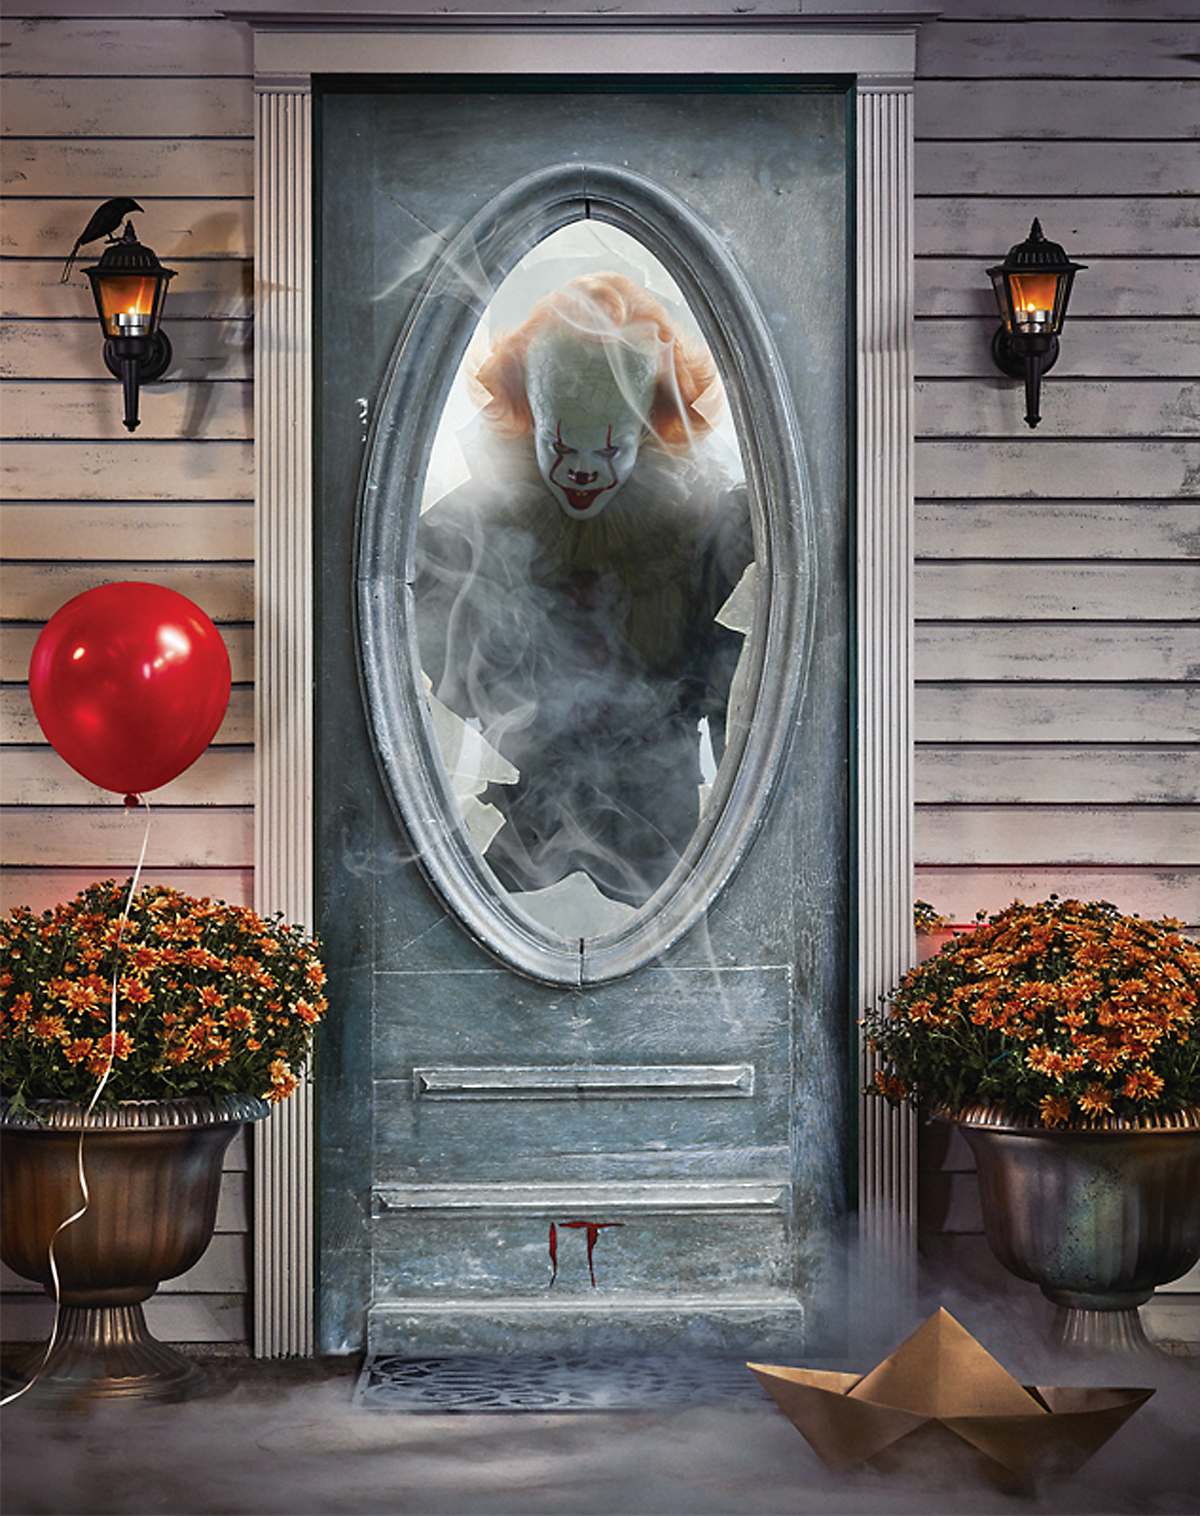 Pennywise Door Cover - It